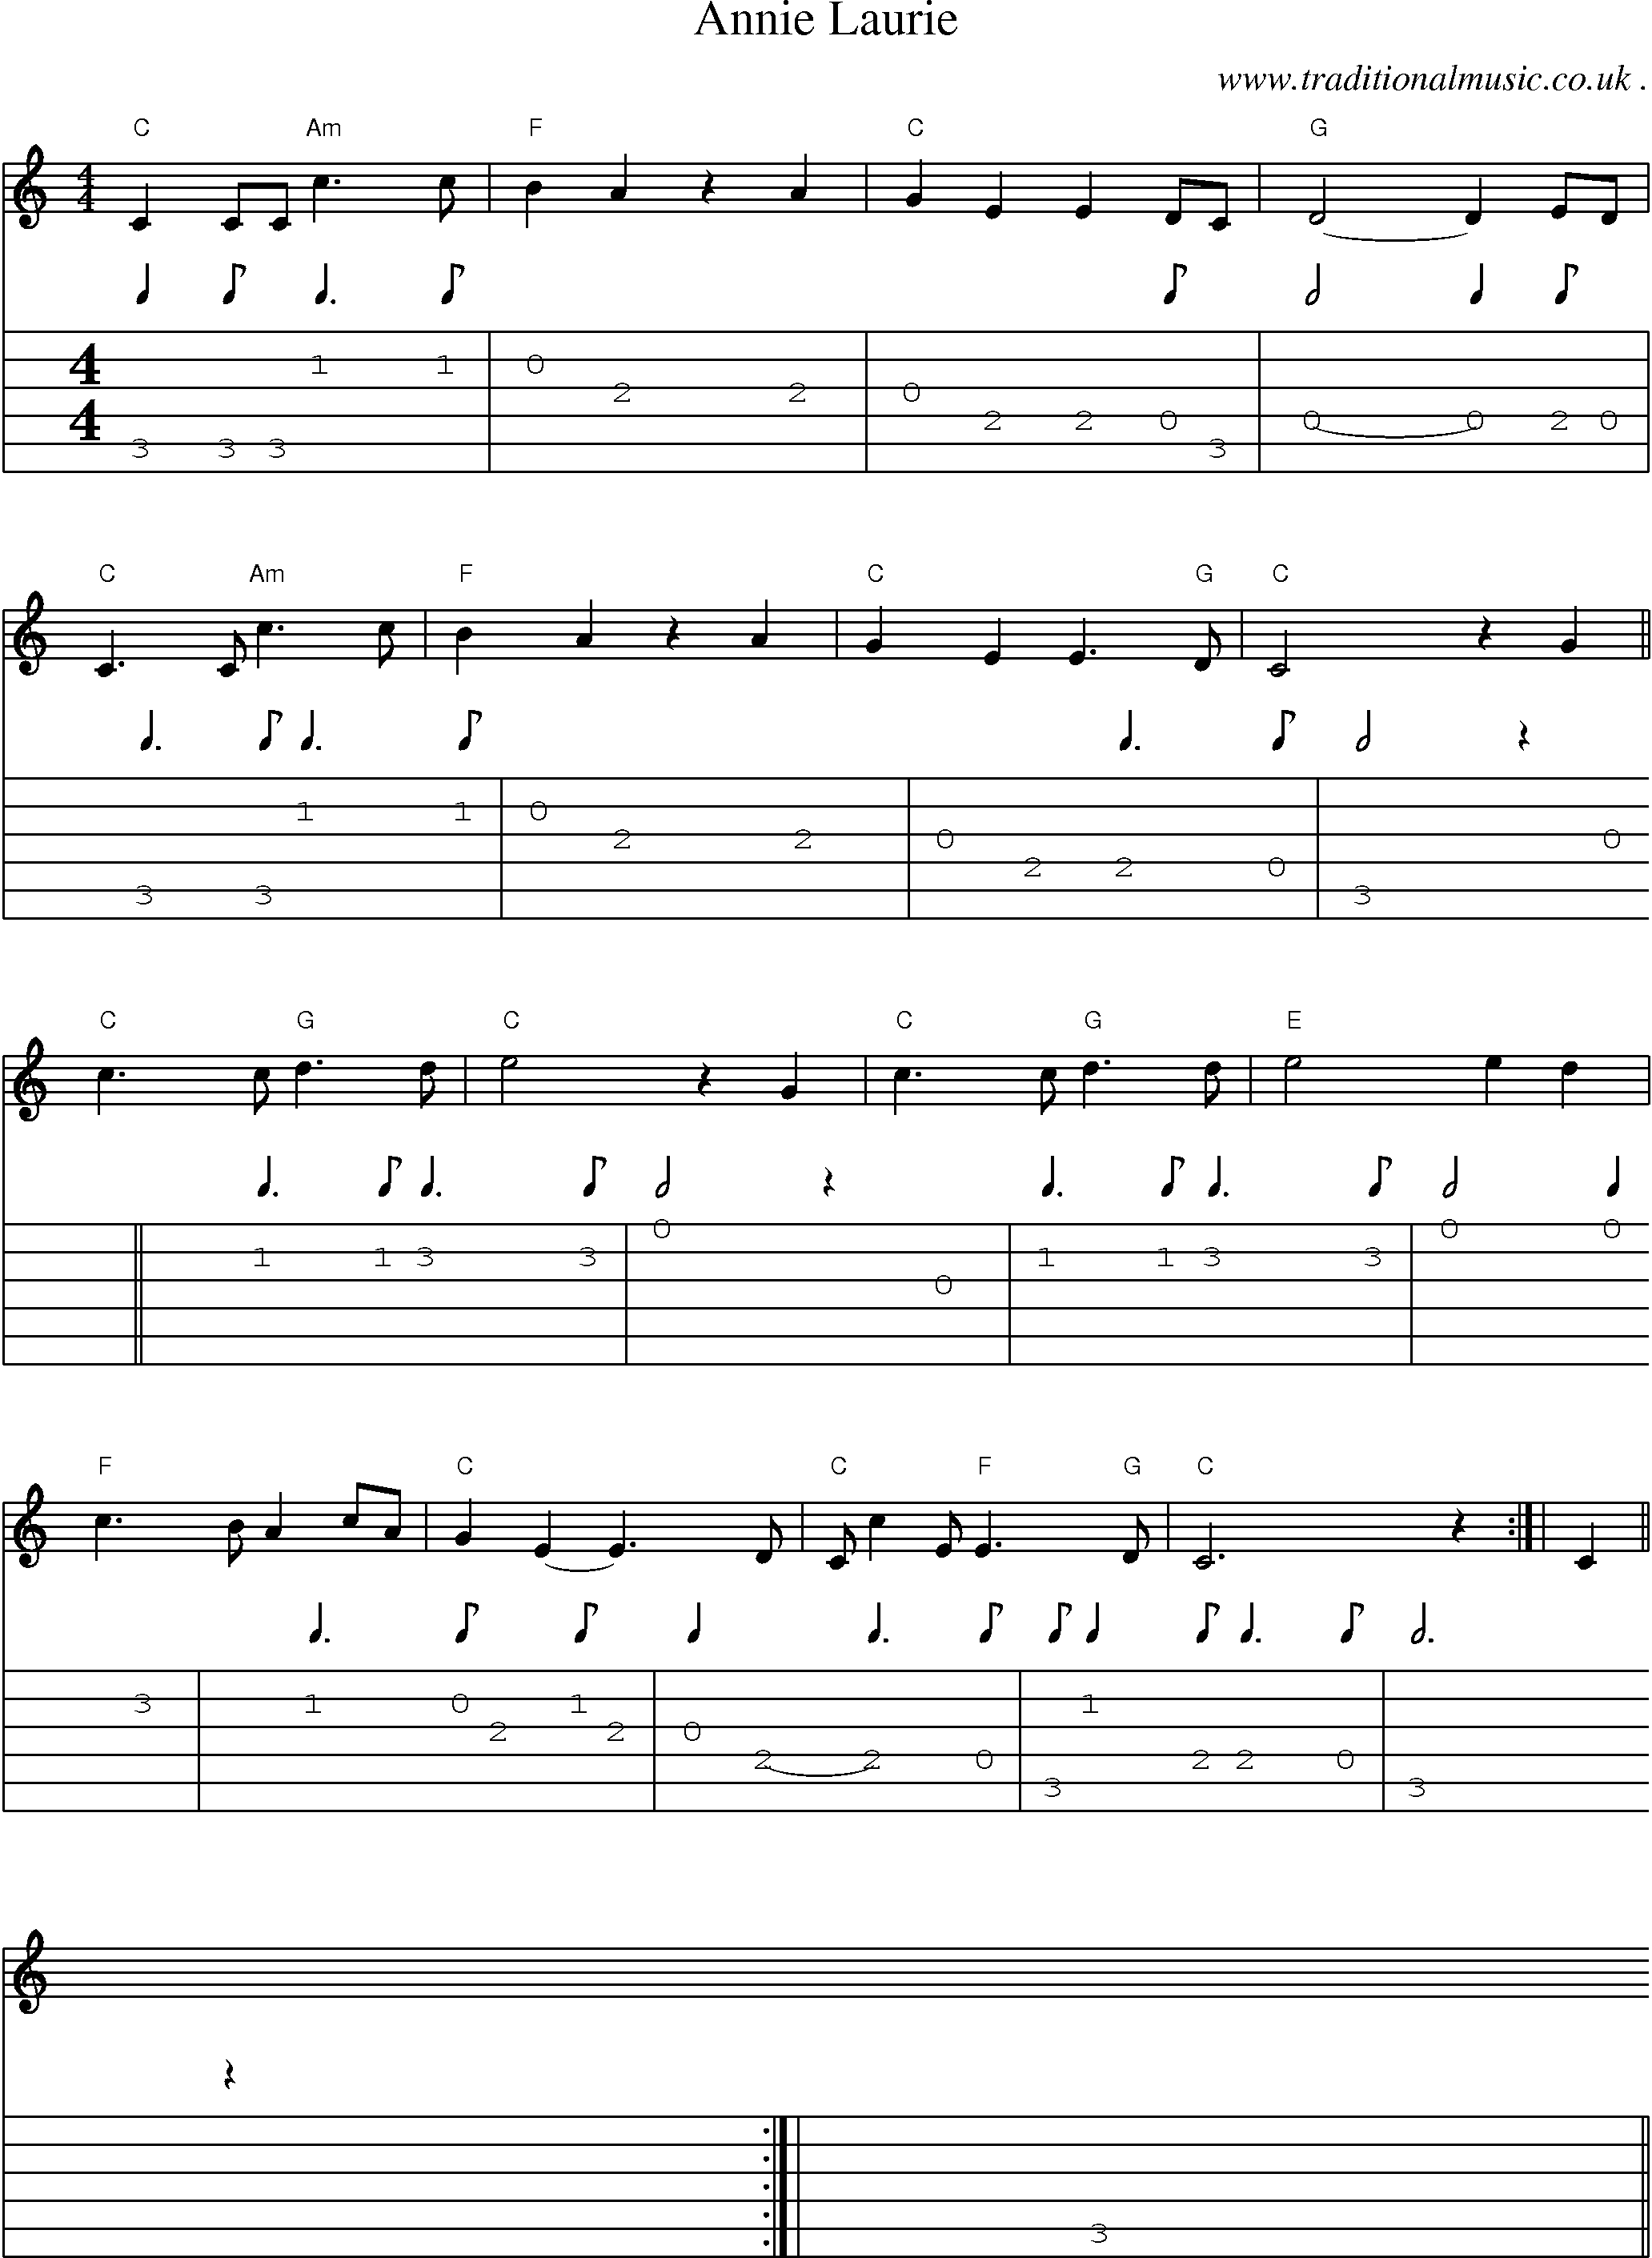 Sheet-music  score, Chords and Guitar Tabs for Annie Laurie